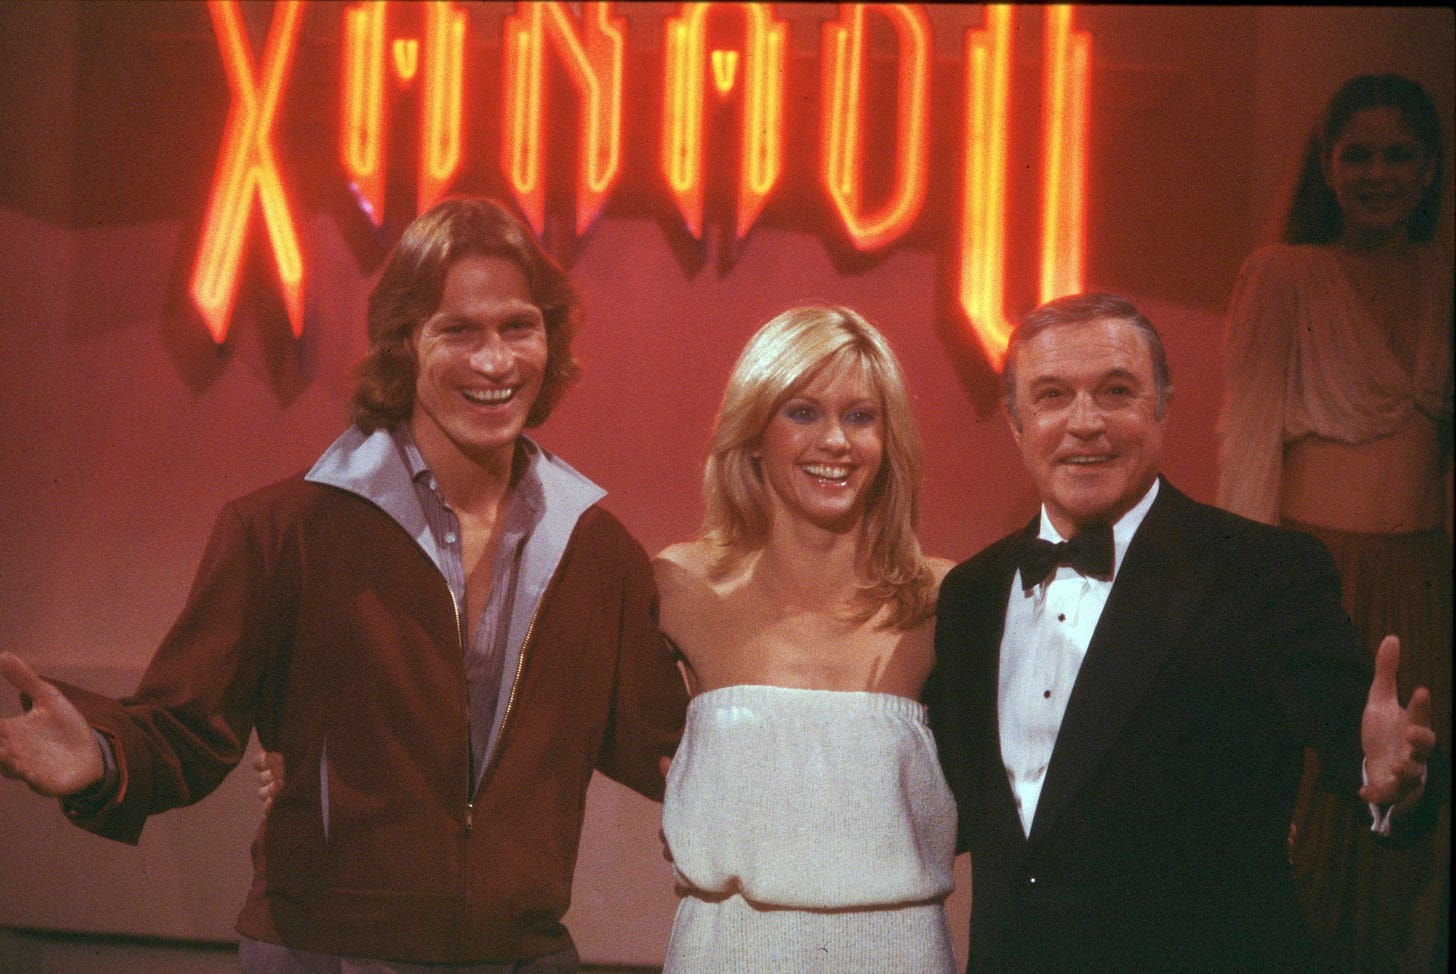 Still from the 1980 movie musical Xanadu featuring Michael beck, Olivia Newtown-John and Gene Kelly